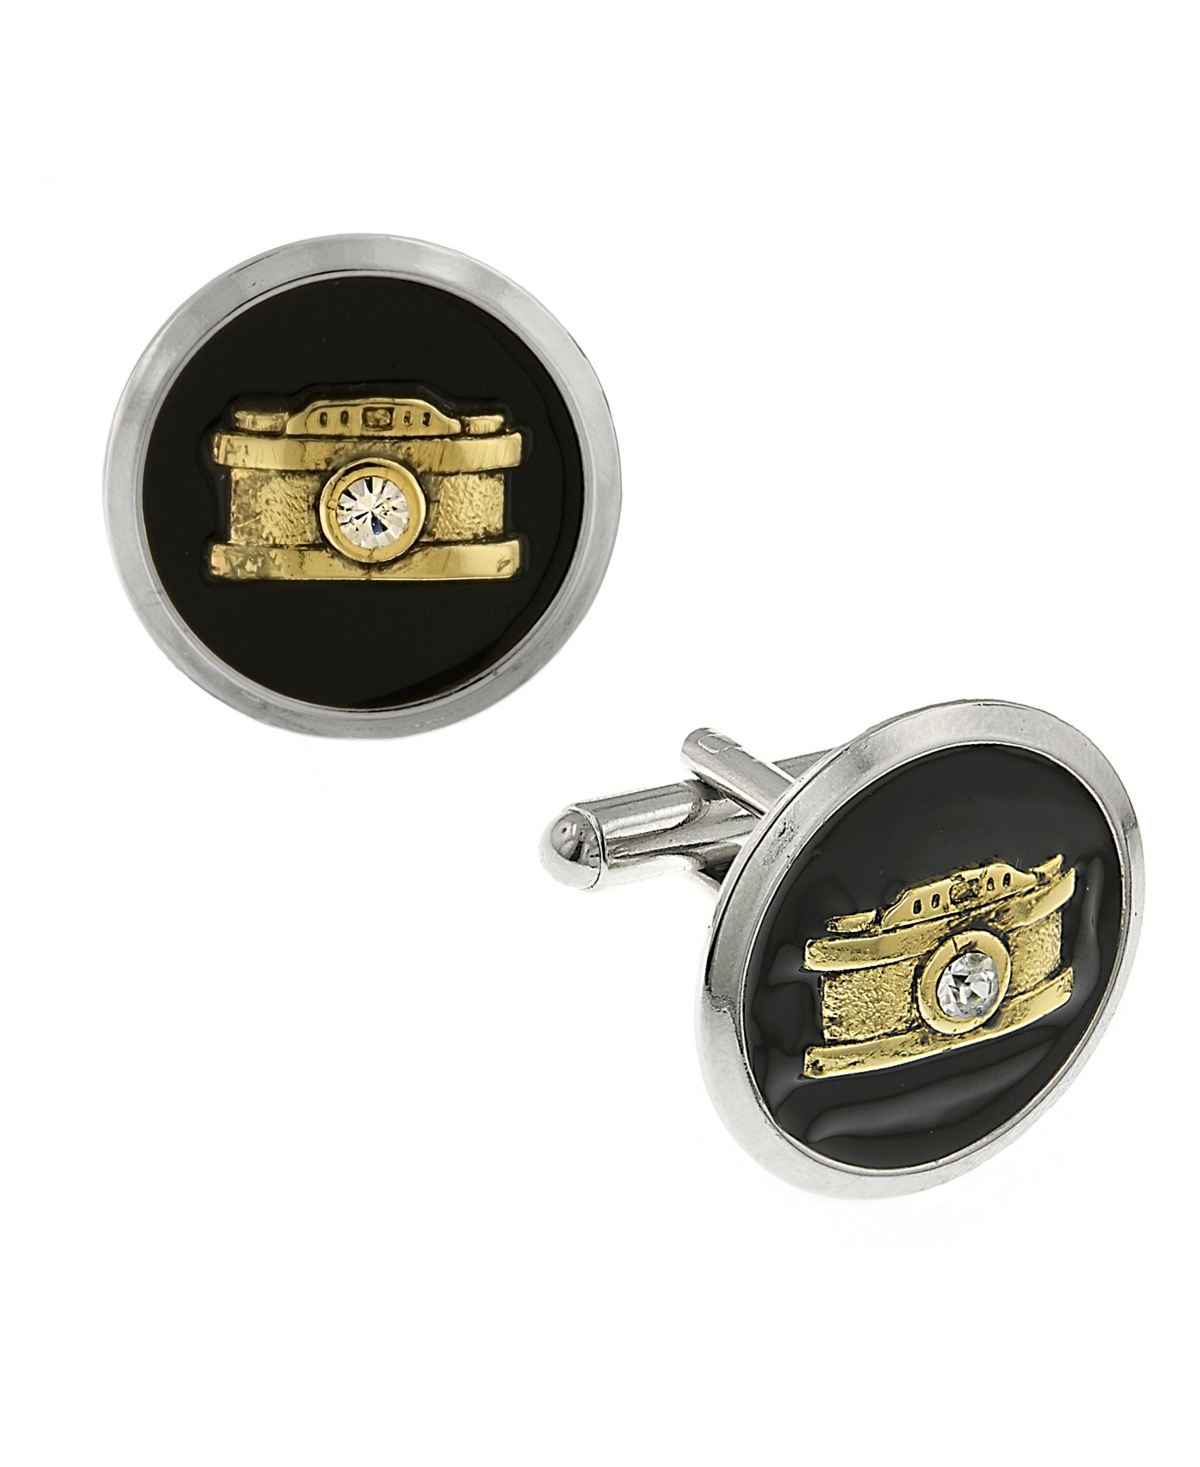 Jewelry Silver-Tone and 14K Gold-Plated Enamel Crystal Camera Cufflinks - Black